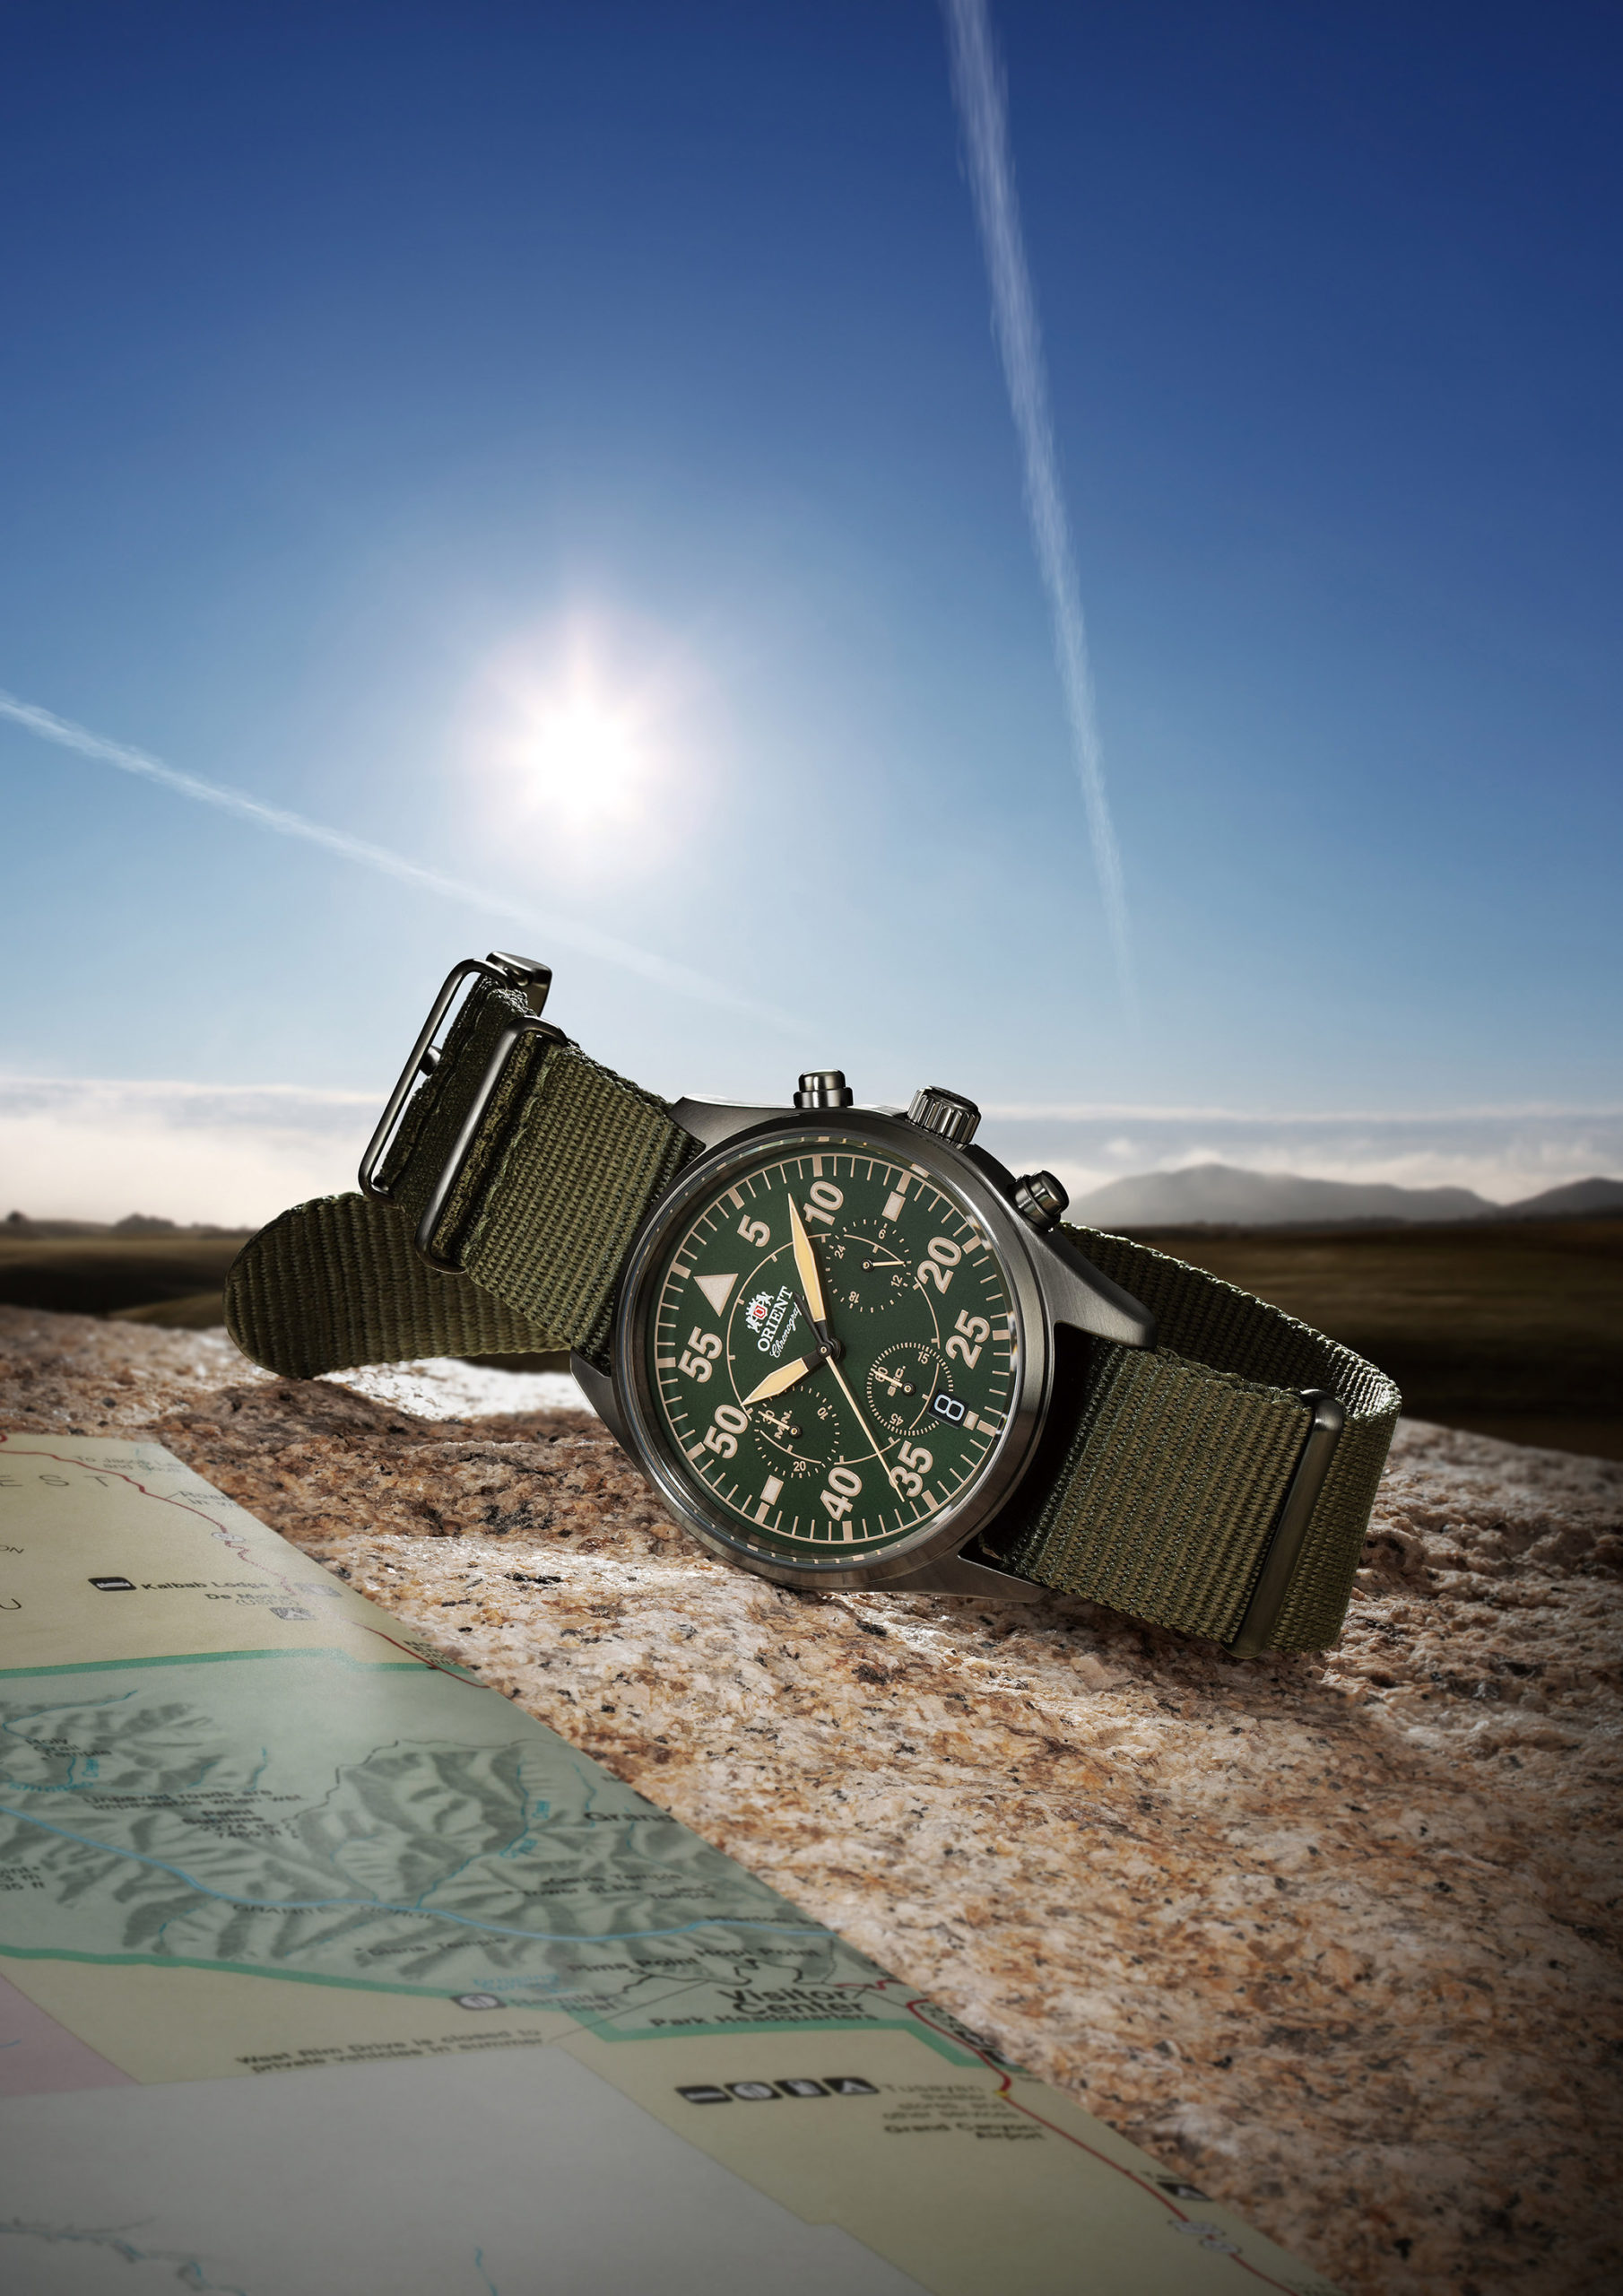 ORIENT adds three new flight style models with chronograph functions to its Sports Collection